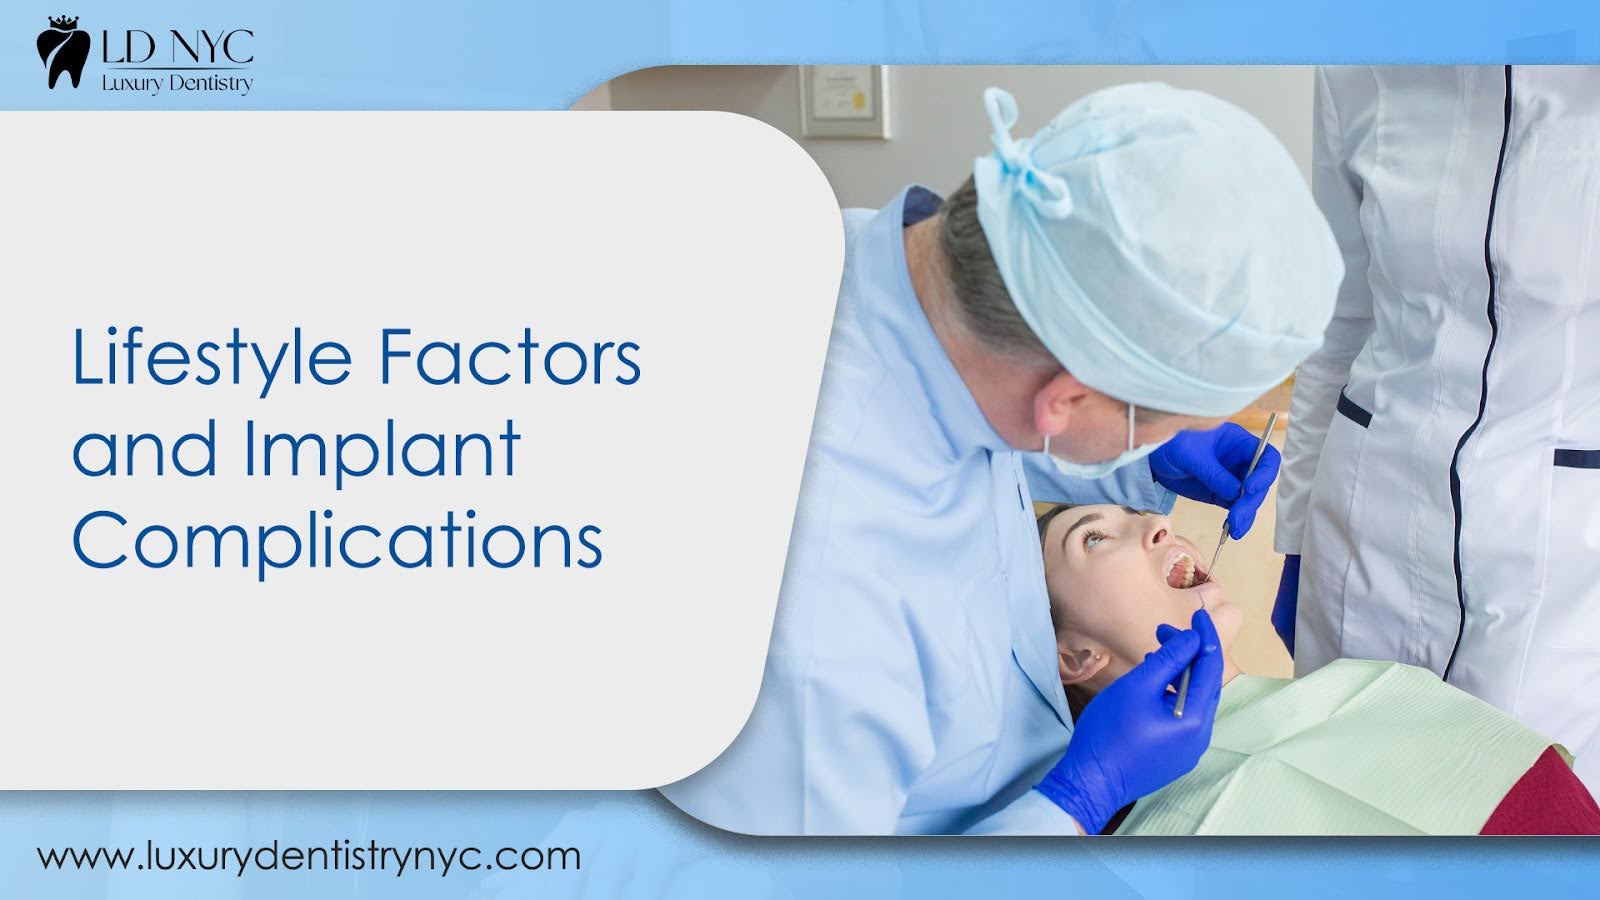 Lifestyle Factors and Implant Complications